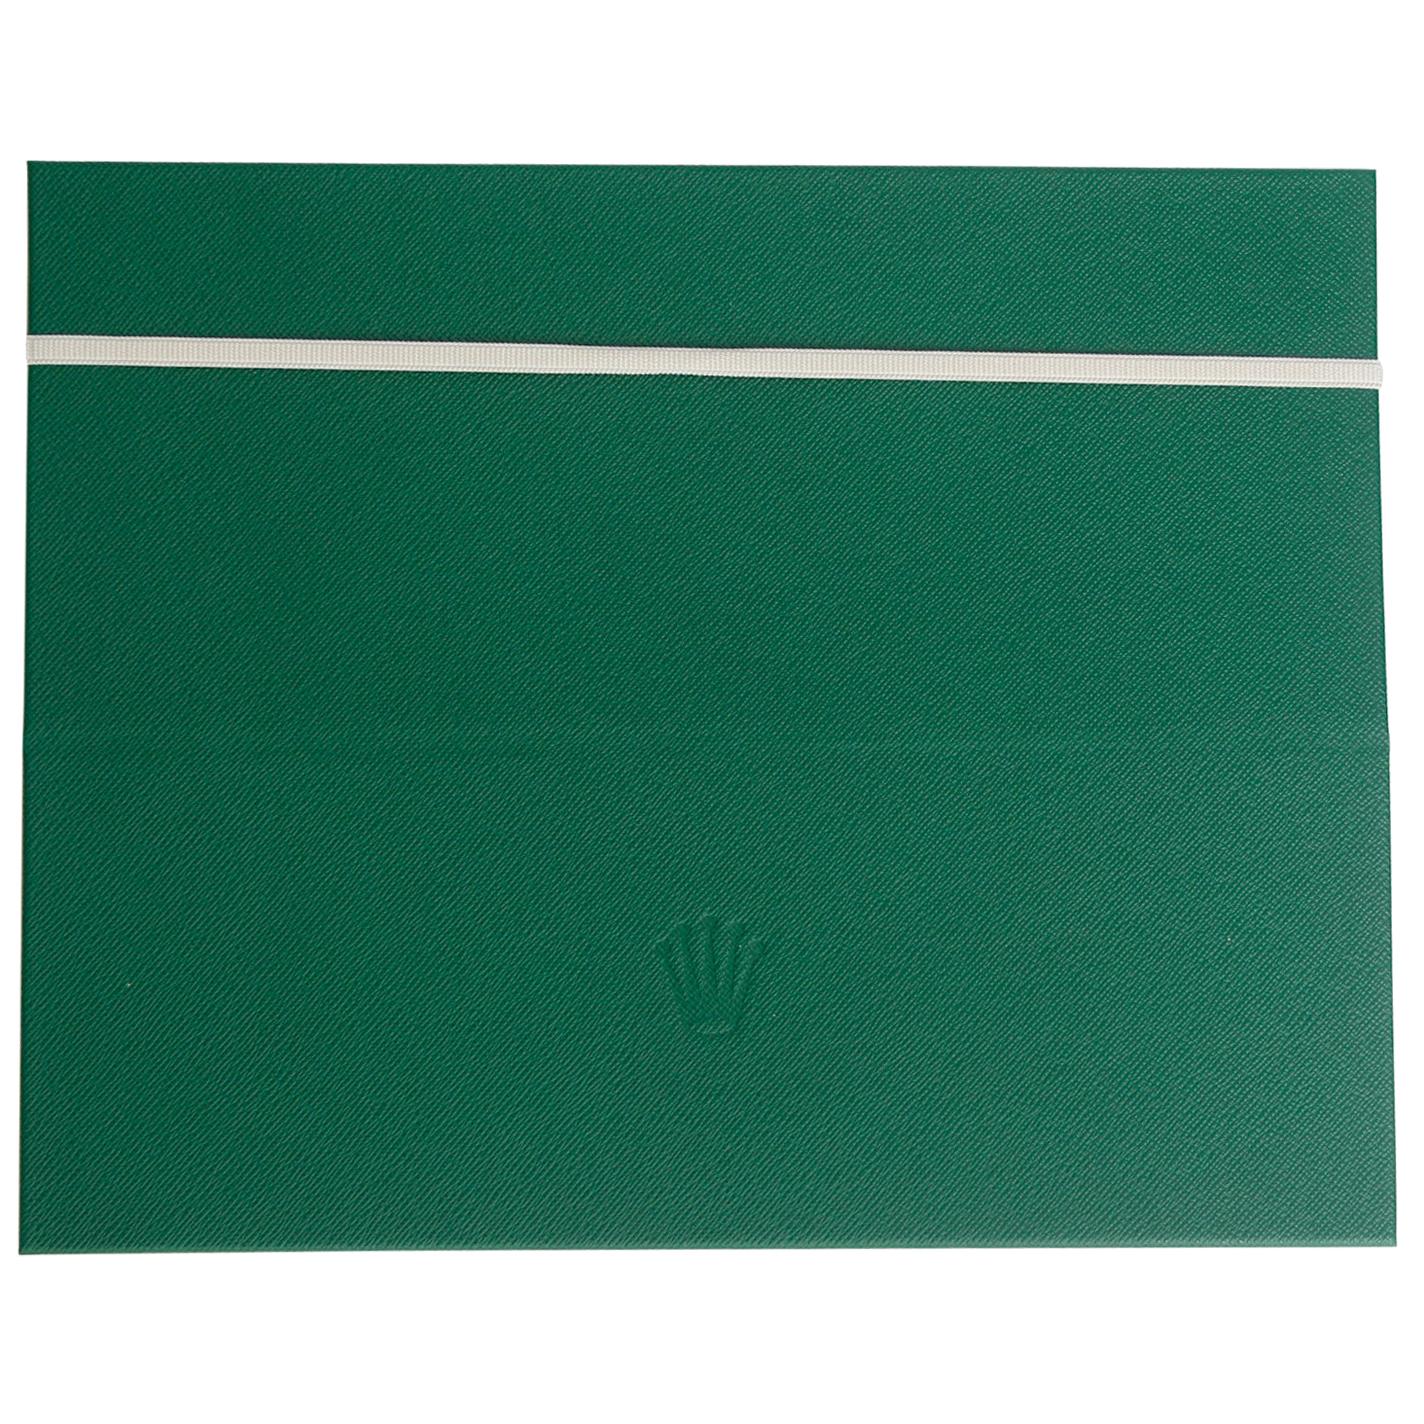 Rolex Green Tablet Case for Ipad or Samsung Tab 4 For Sale